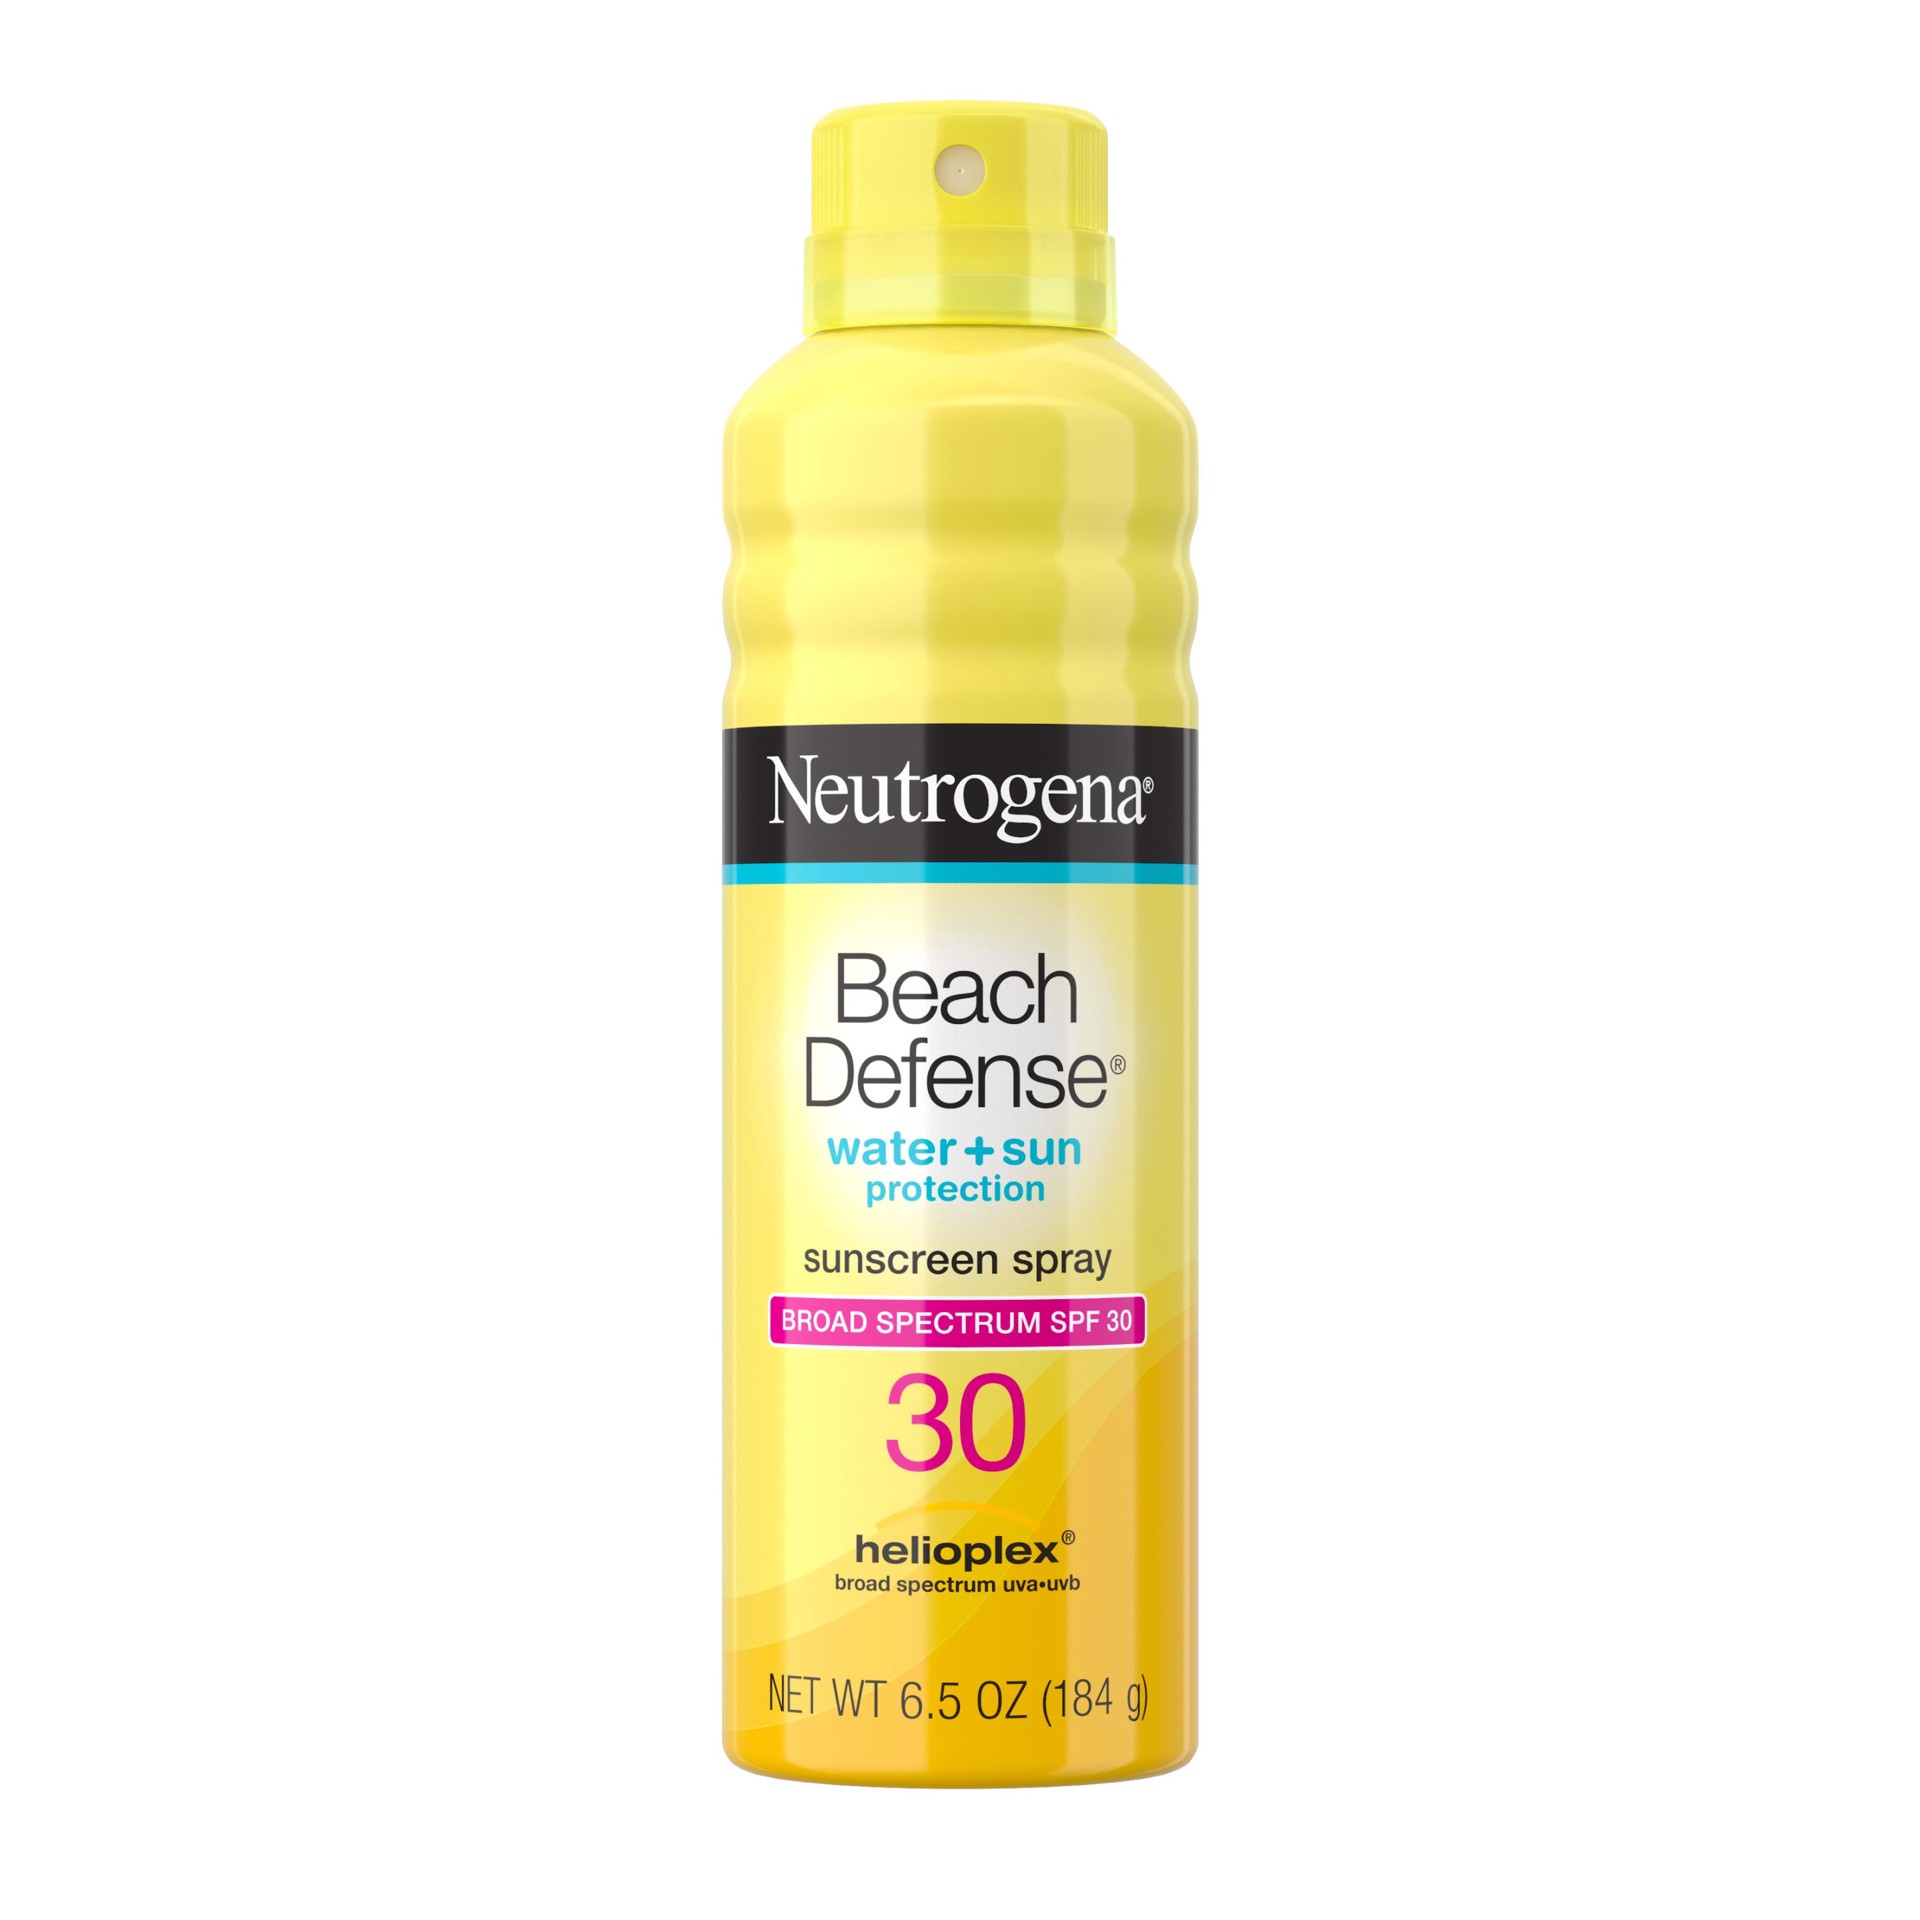 slide 1 of 6, Neutrogena Beach Defense Sunscreen Spray SPF 30 Water-Resistant Sunscreen Body Spray with Broad Spectrum SPF 30, PABA-Free, Oxybenzone-Free & Fast-Drying, Superior Sun Protection, 6.5 oz, 6.5 oz